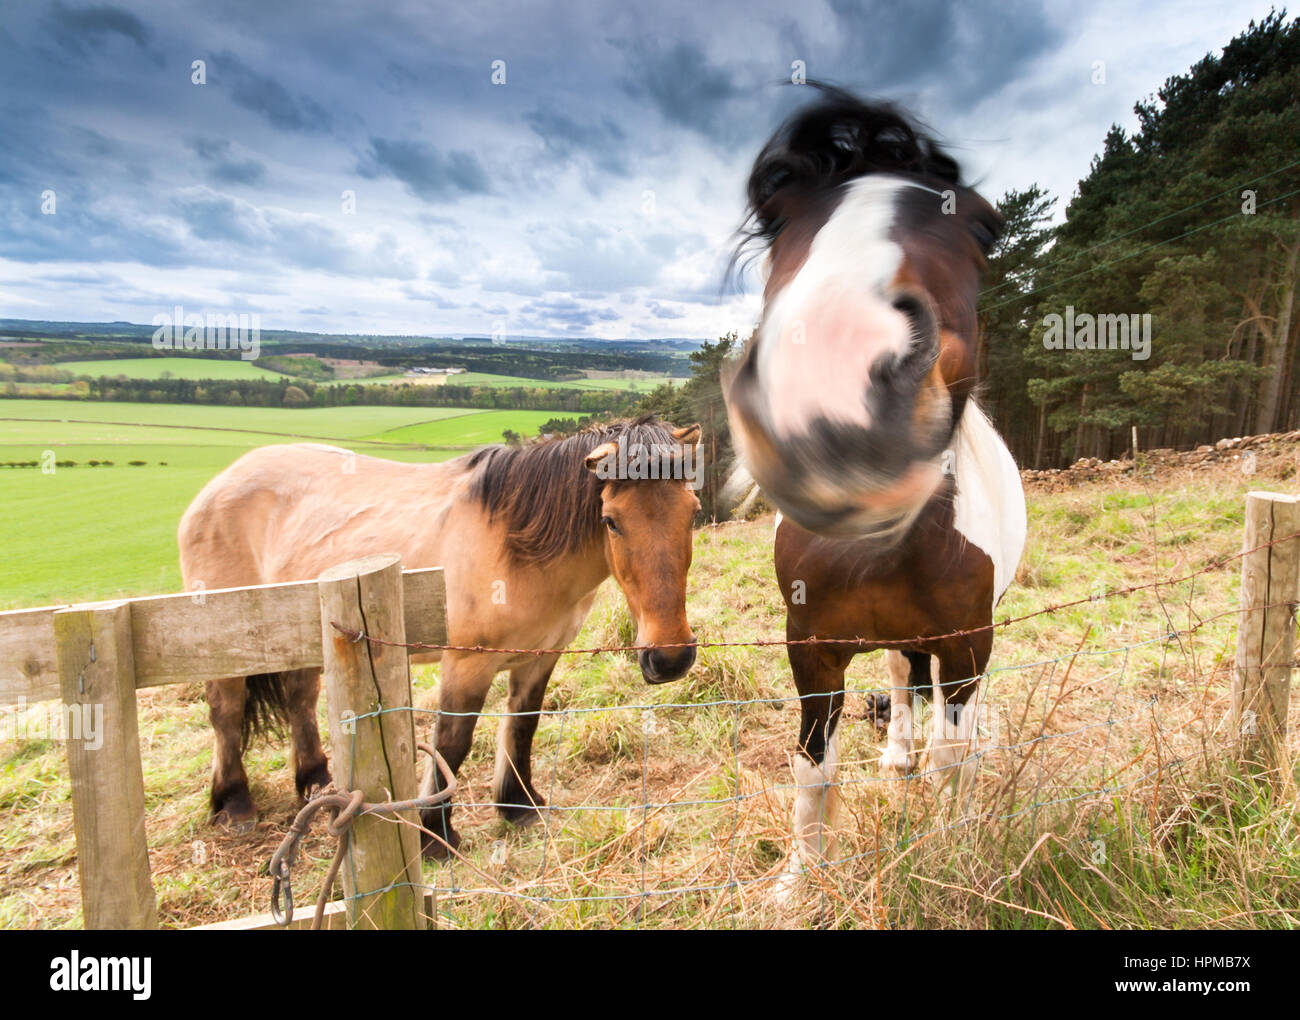 Horses In a field shaking fly's Stock Photo